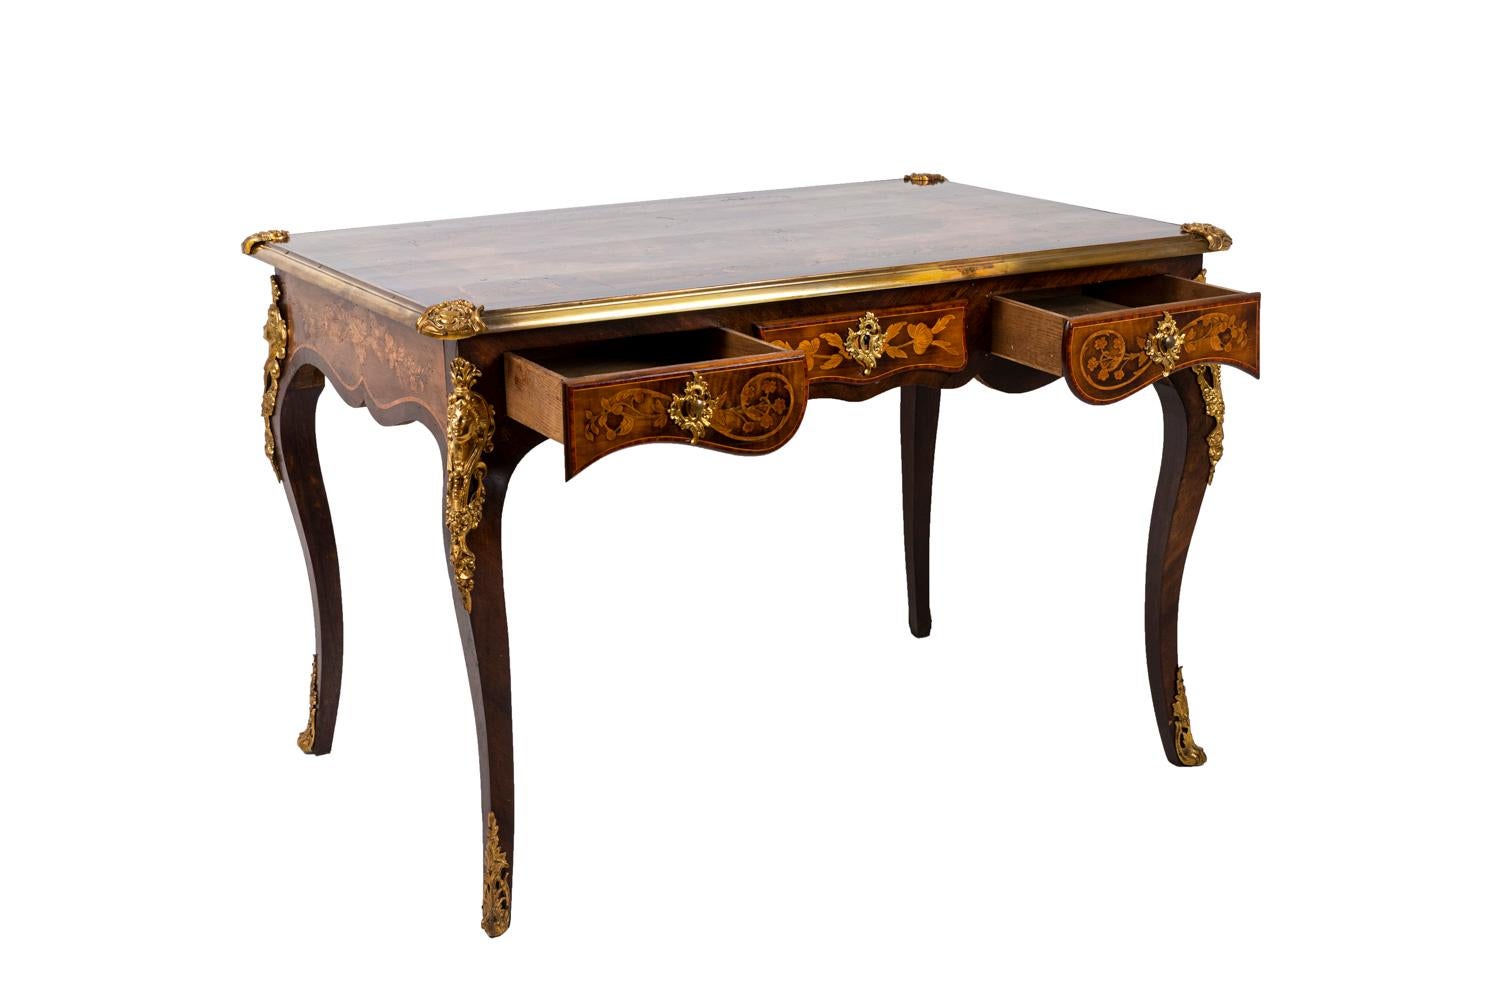 Louis XV style desk in kingwood standing on four cabriole legs and opening by three drawers. Decor of flowers and vegetal scrolls in inlaid exotic woods on the tray, the drawers fronts and the lateral studs. Chiseled and gilt bronze ornamentations